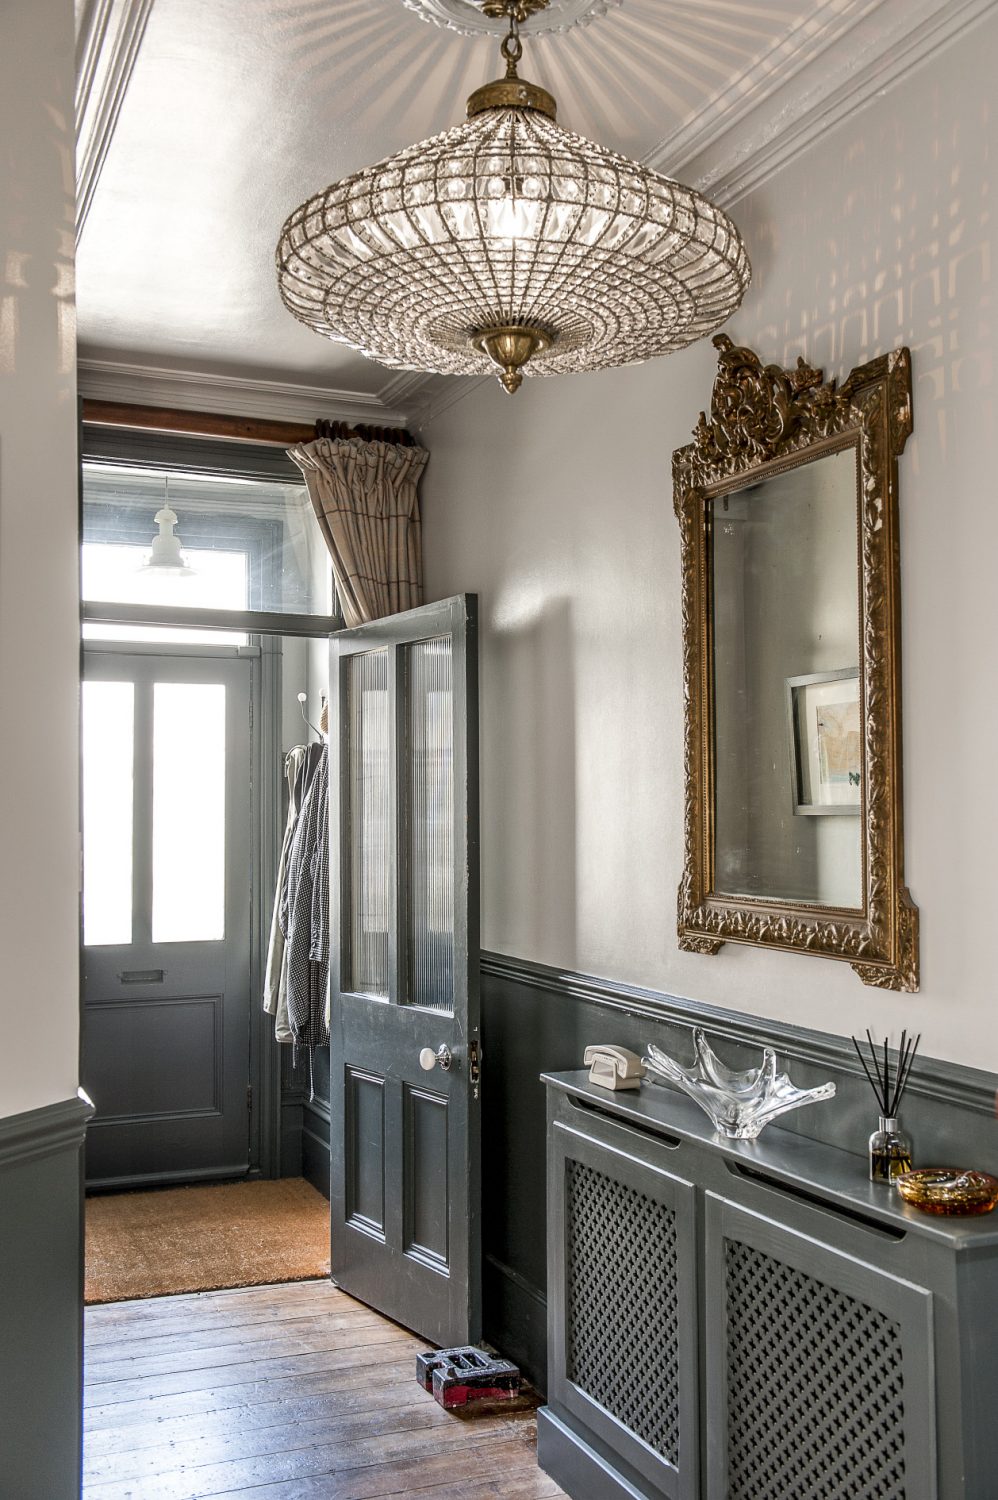 The hallway has been painted a deep shade of grey with accents of gold and sparkling glass provided by the beautifully shaped chandelier, another find from Hastings Antiques Centre